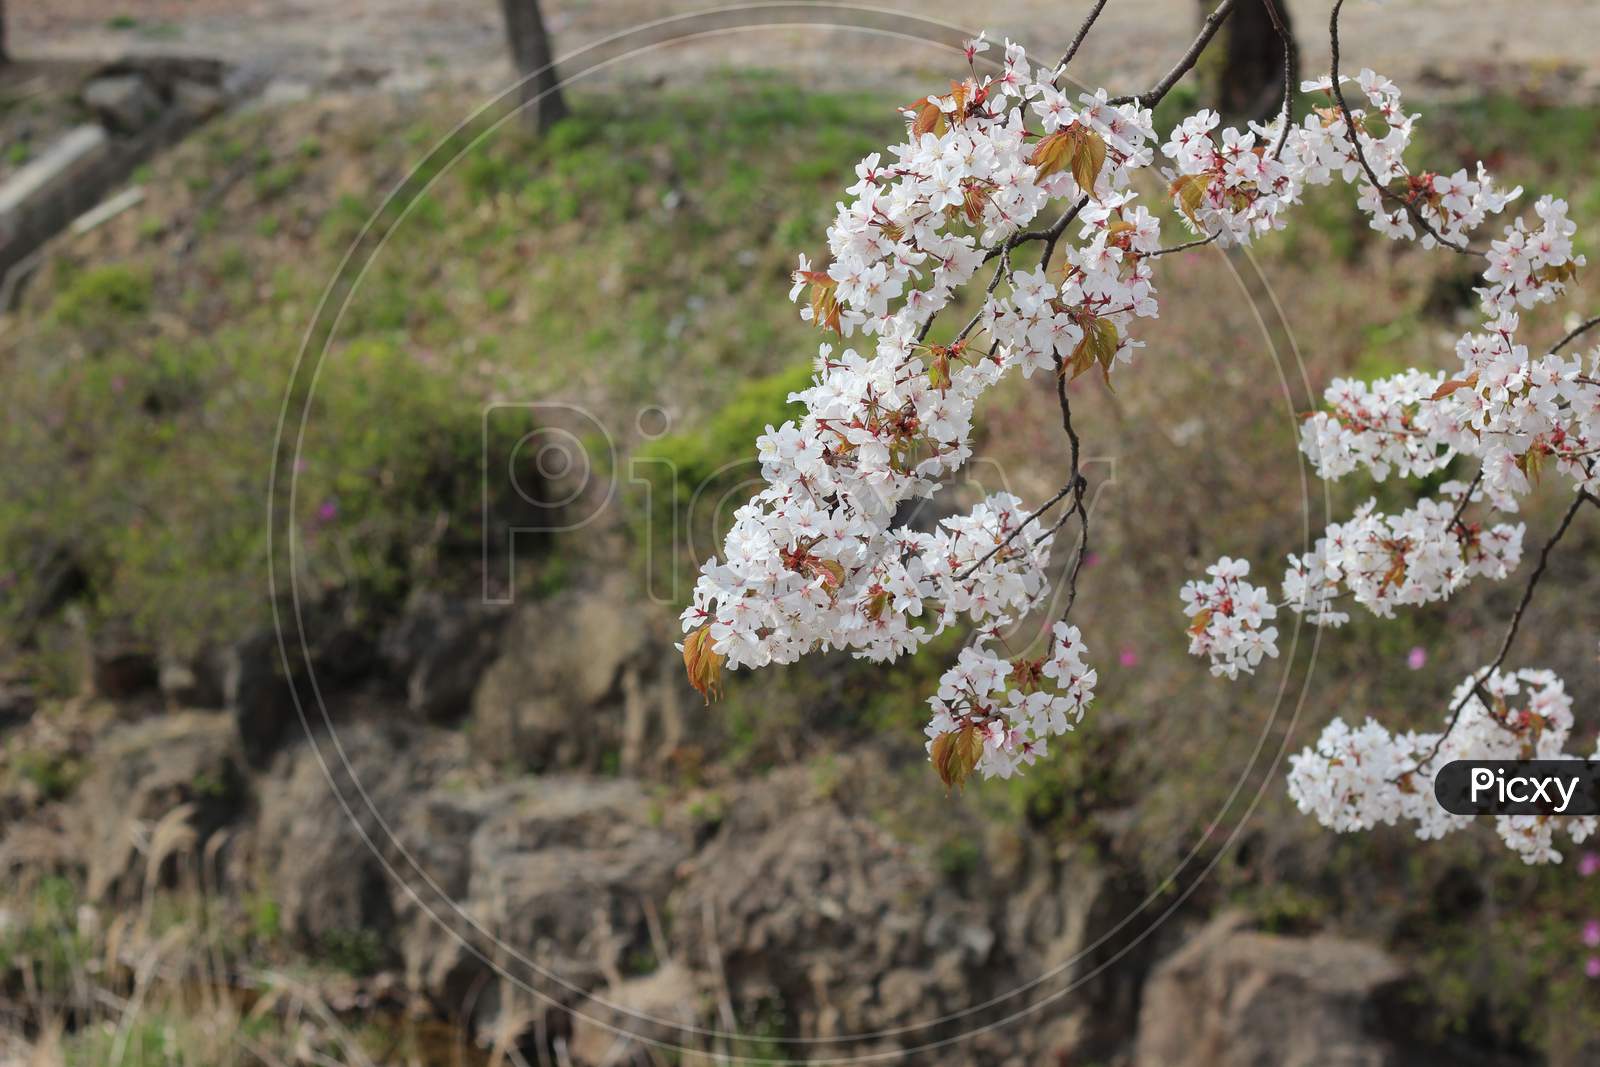 Blossoming White Cherry Flowers With Green Leaves